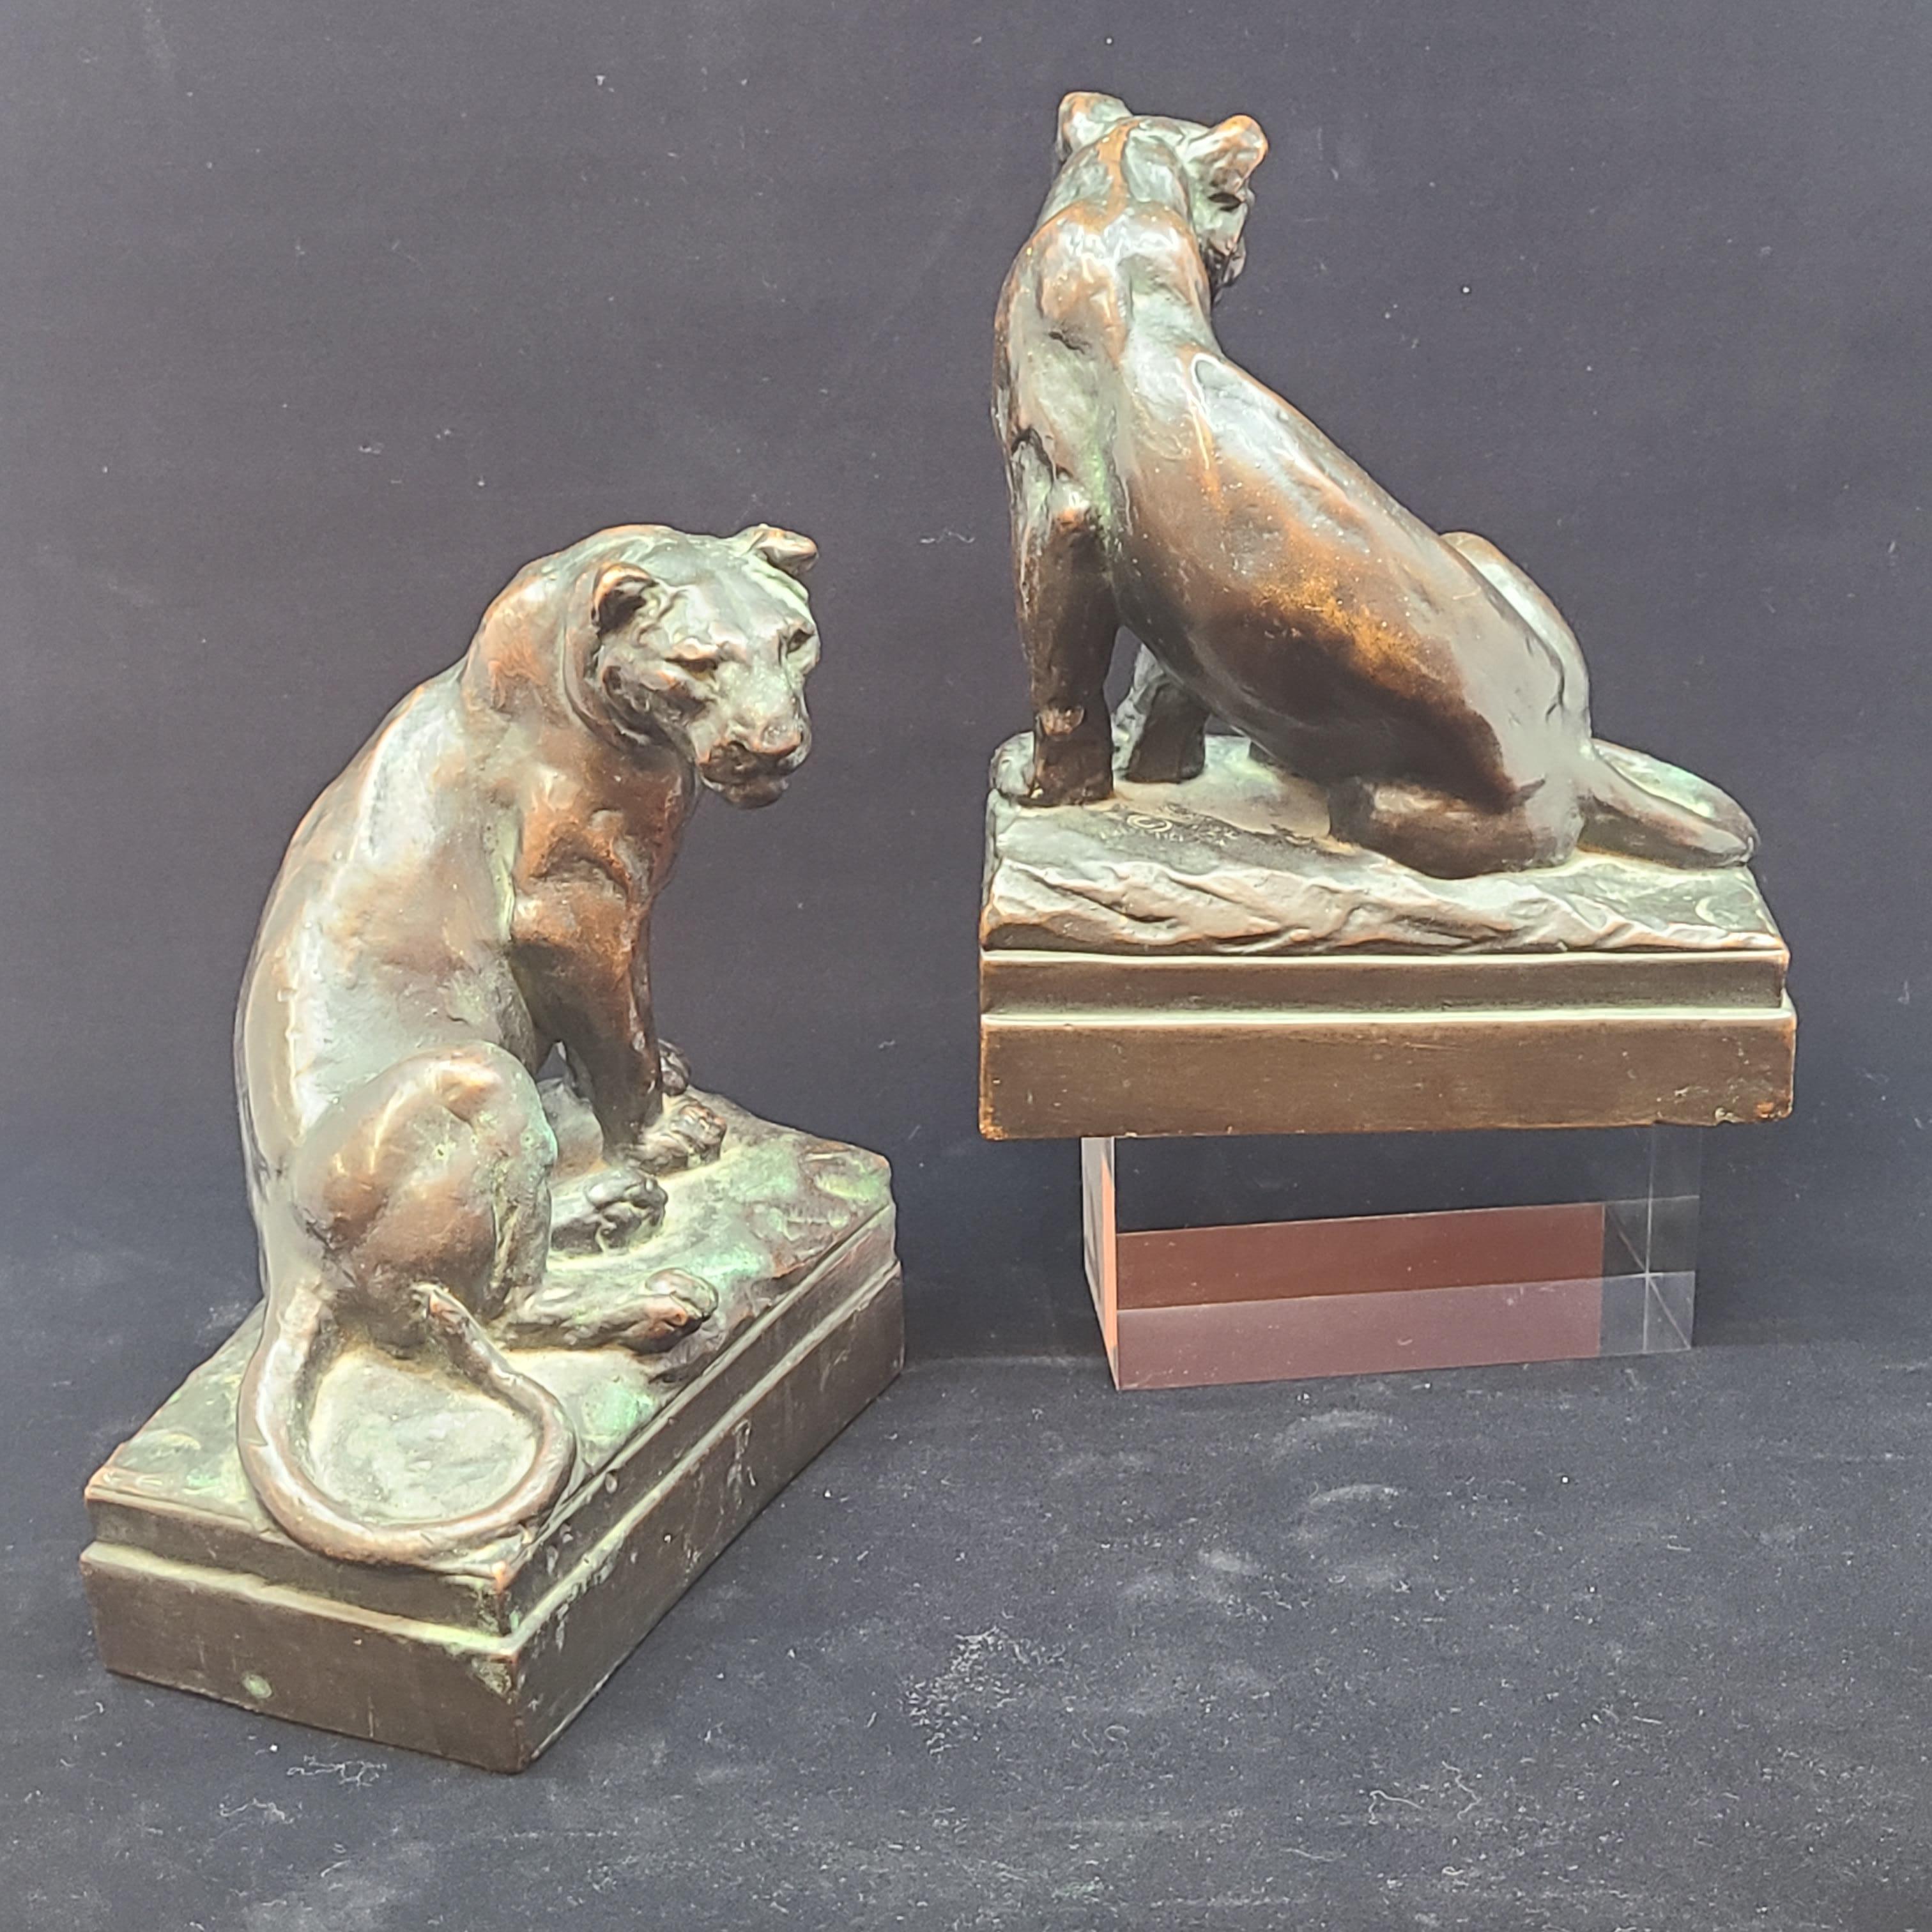 Beautiful pair of bronze clad lion bookends by Pompeian Bronze with excellent patina. Good size and weight bookends. Not a common design by Pompeian Bronze but my favorite.